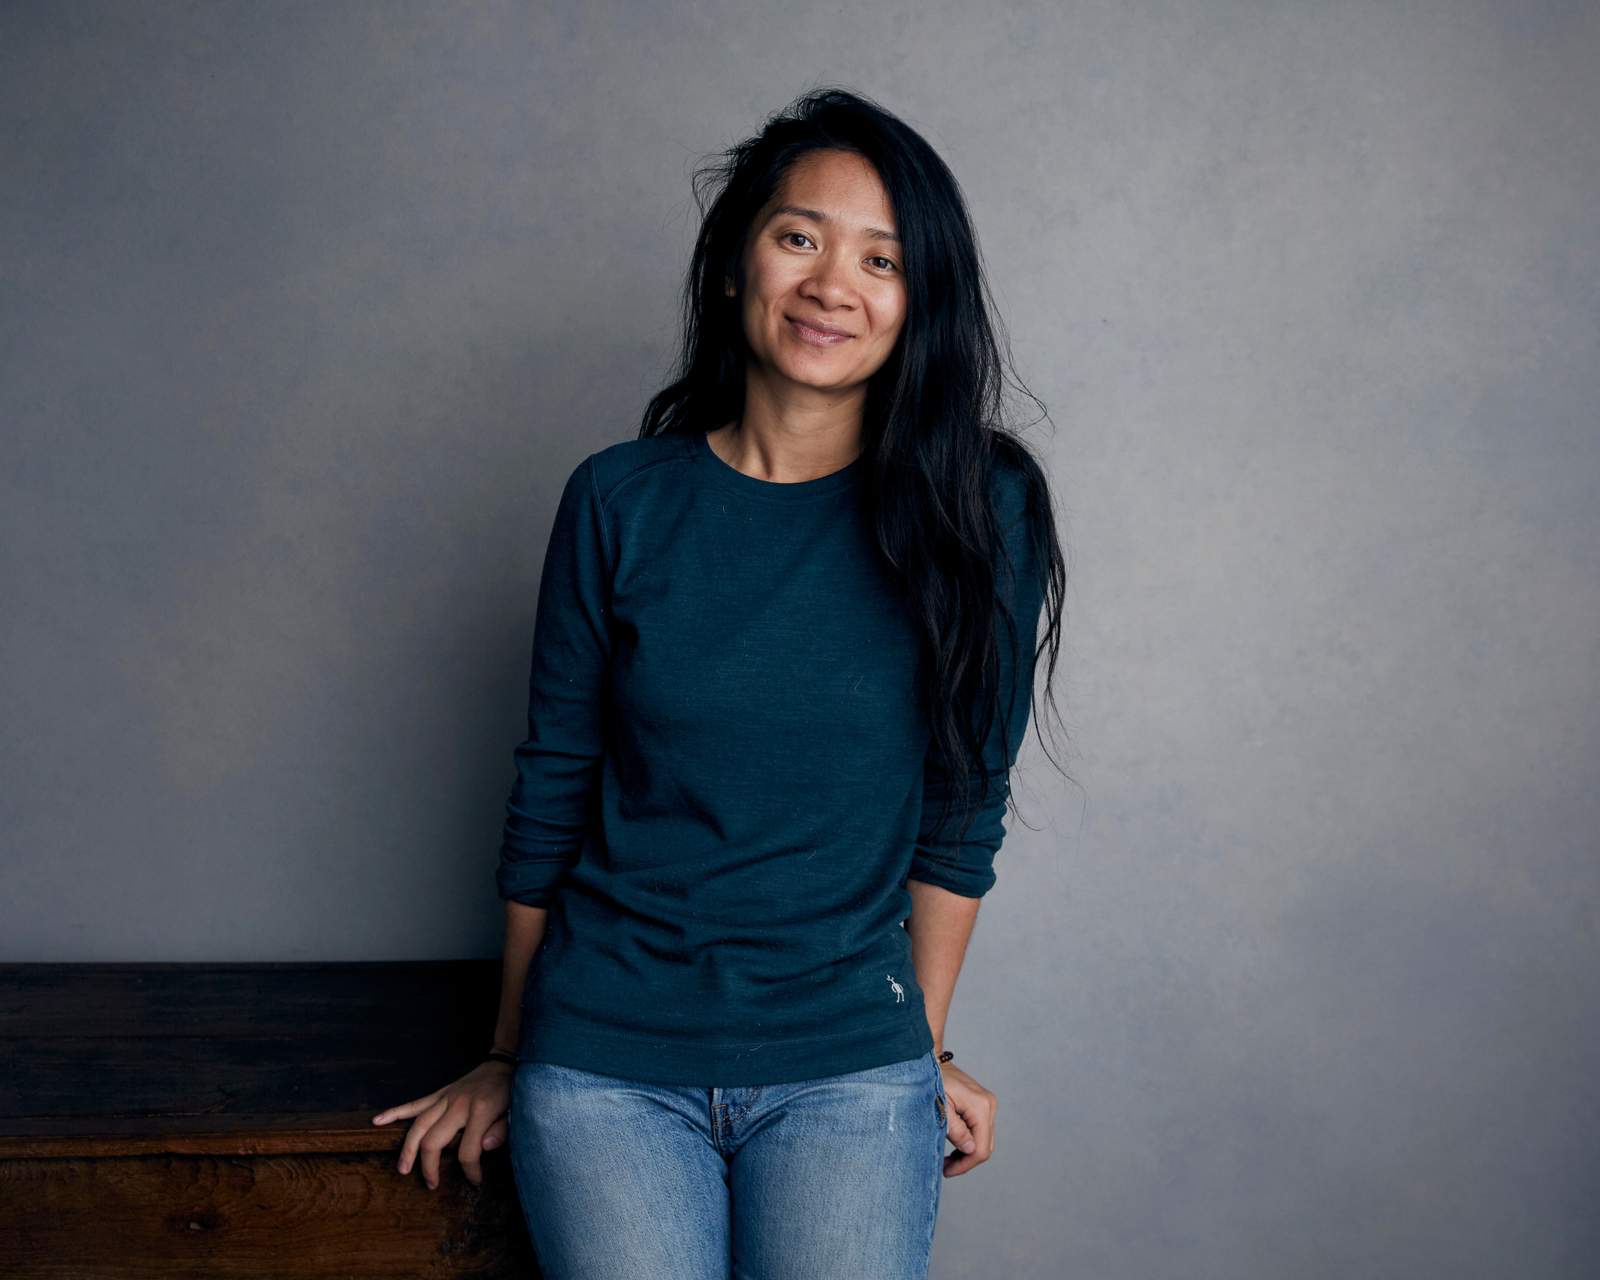 Chloé Zhao becomes 1st woman of color to win top DGA honor